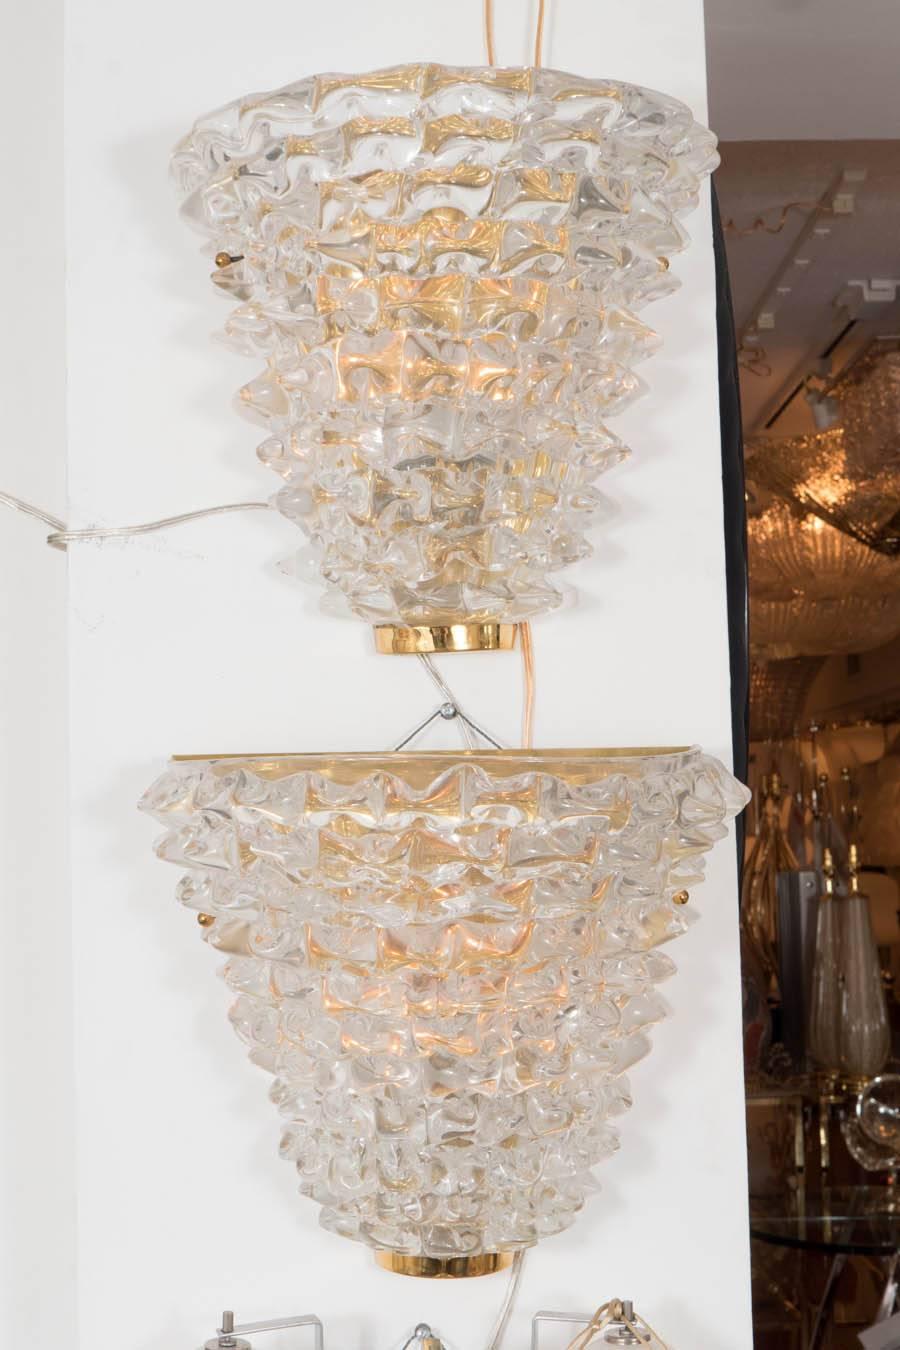 Pair of clear spiked Murano glass sconces with brass hardware.